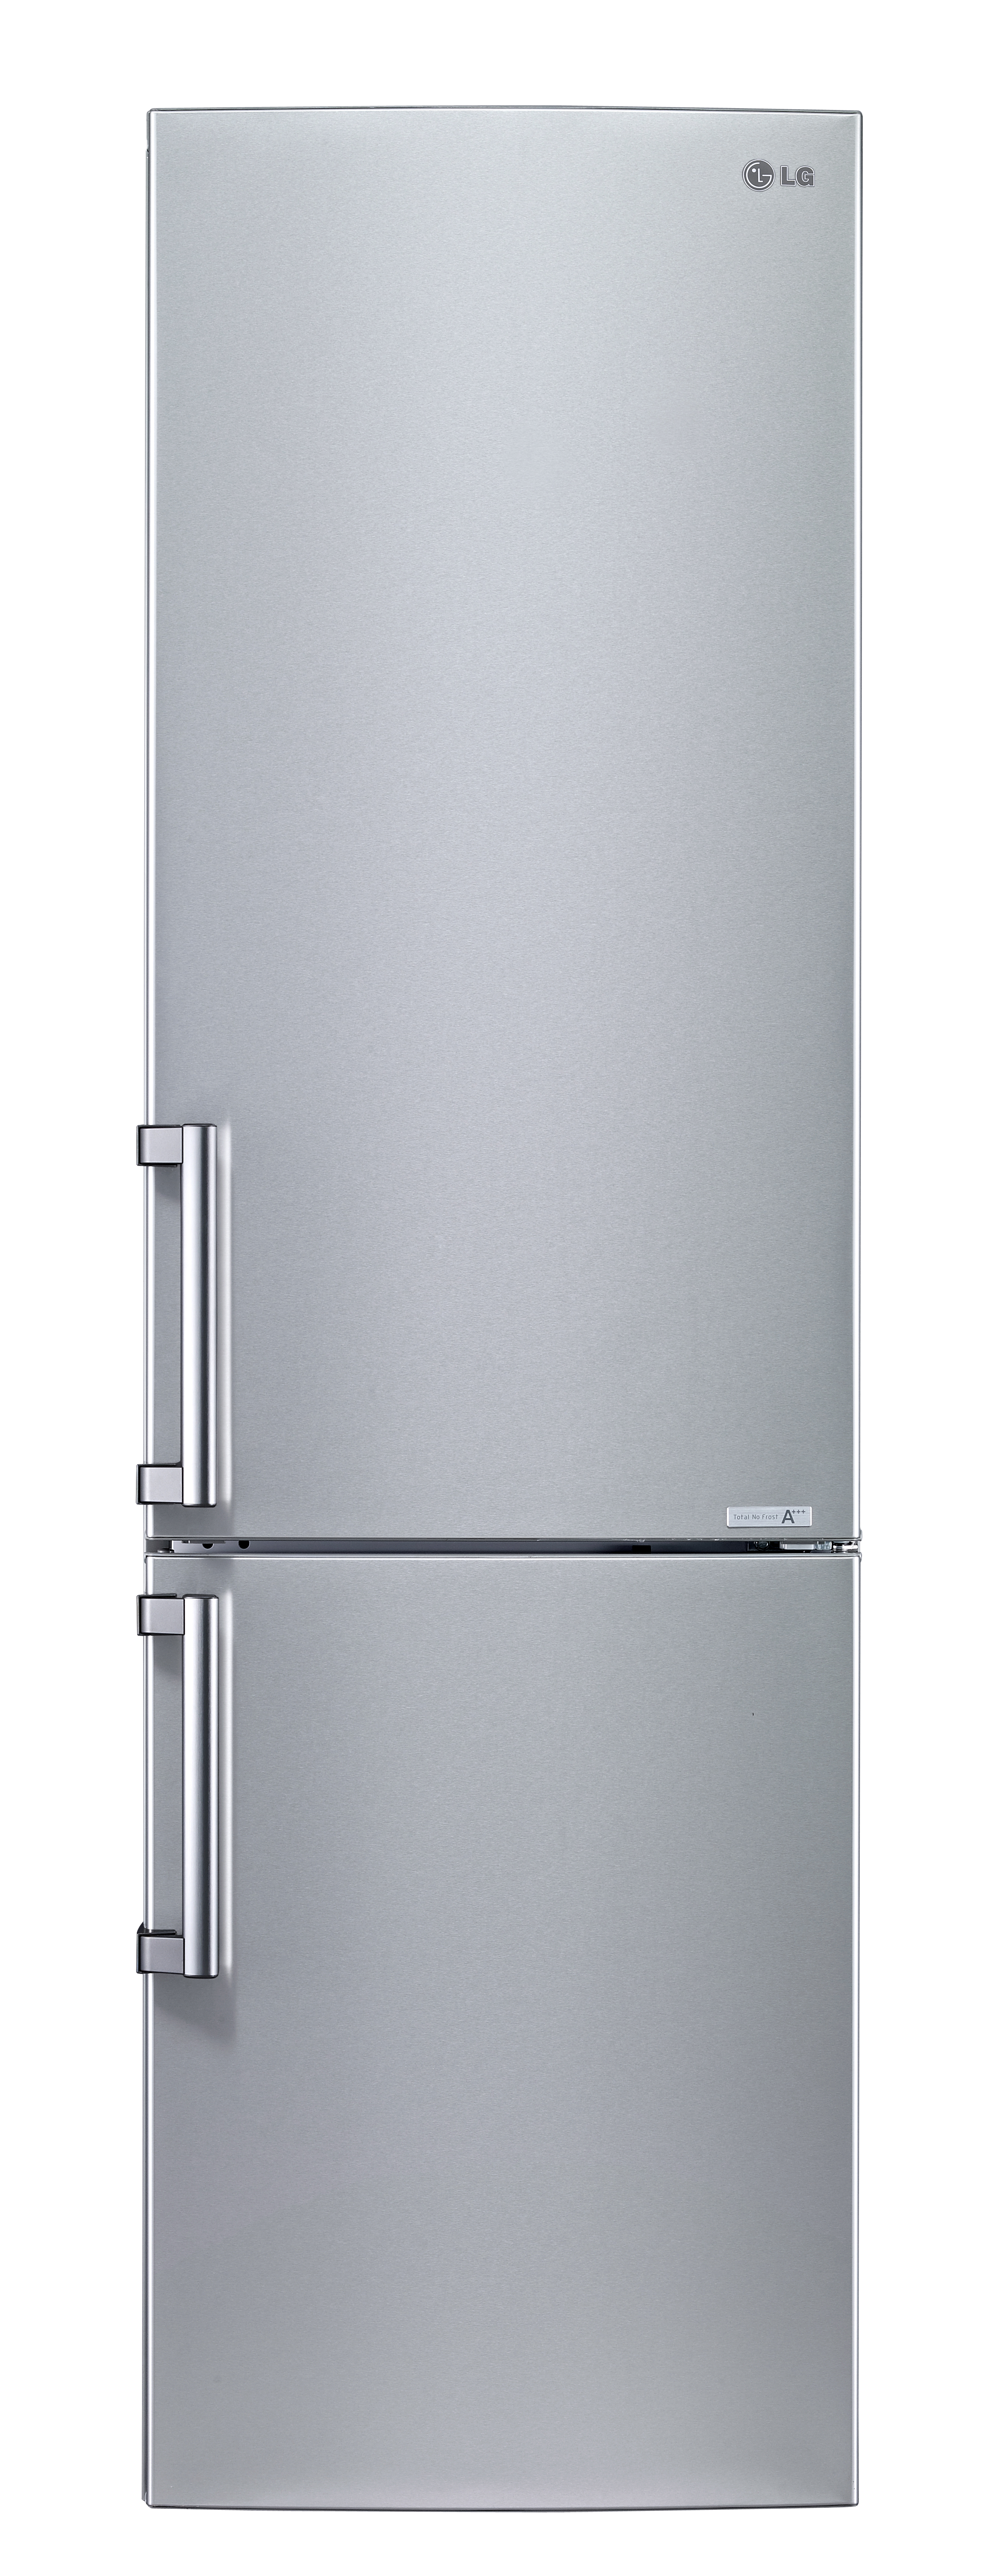 Front view of the LG bottom-freezer refrigerator